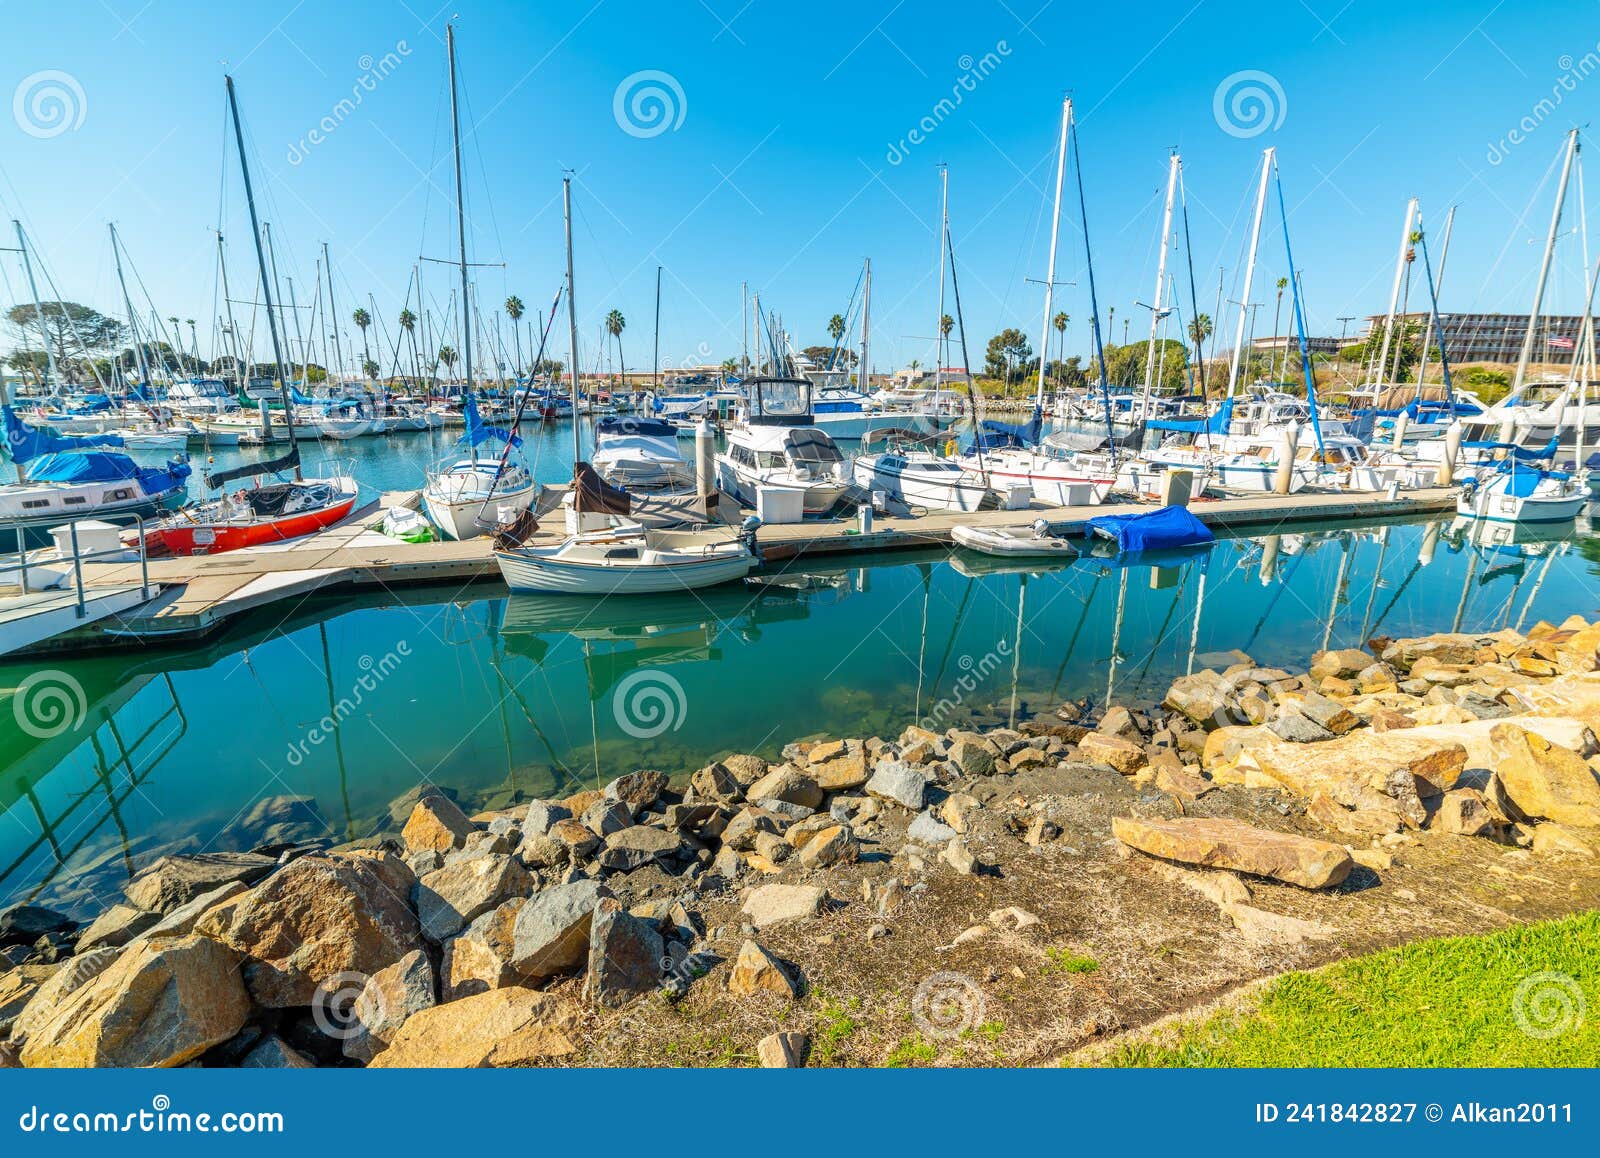 Boats in Oceanside Harbor on a Sunny Day Editorial Photography - Image ...